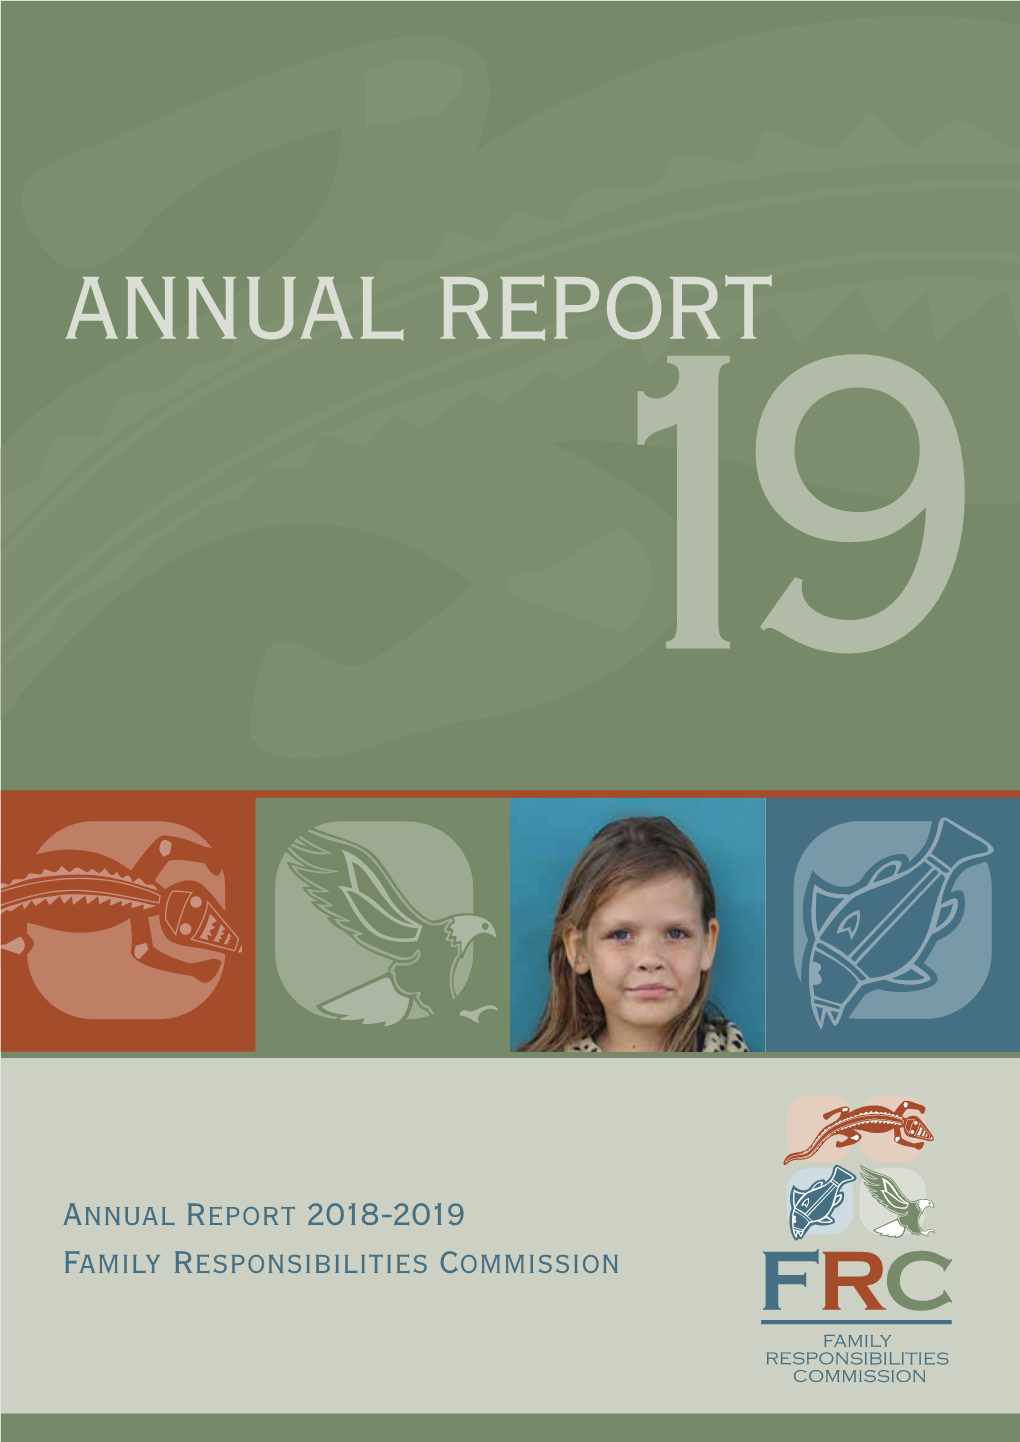 Annual Report 2018-2019 Family Responsibilities Commission